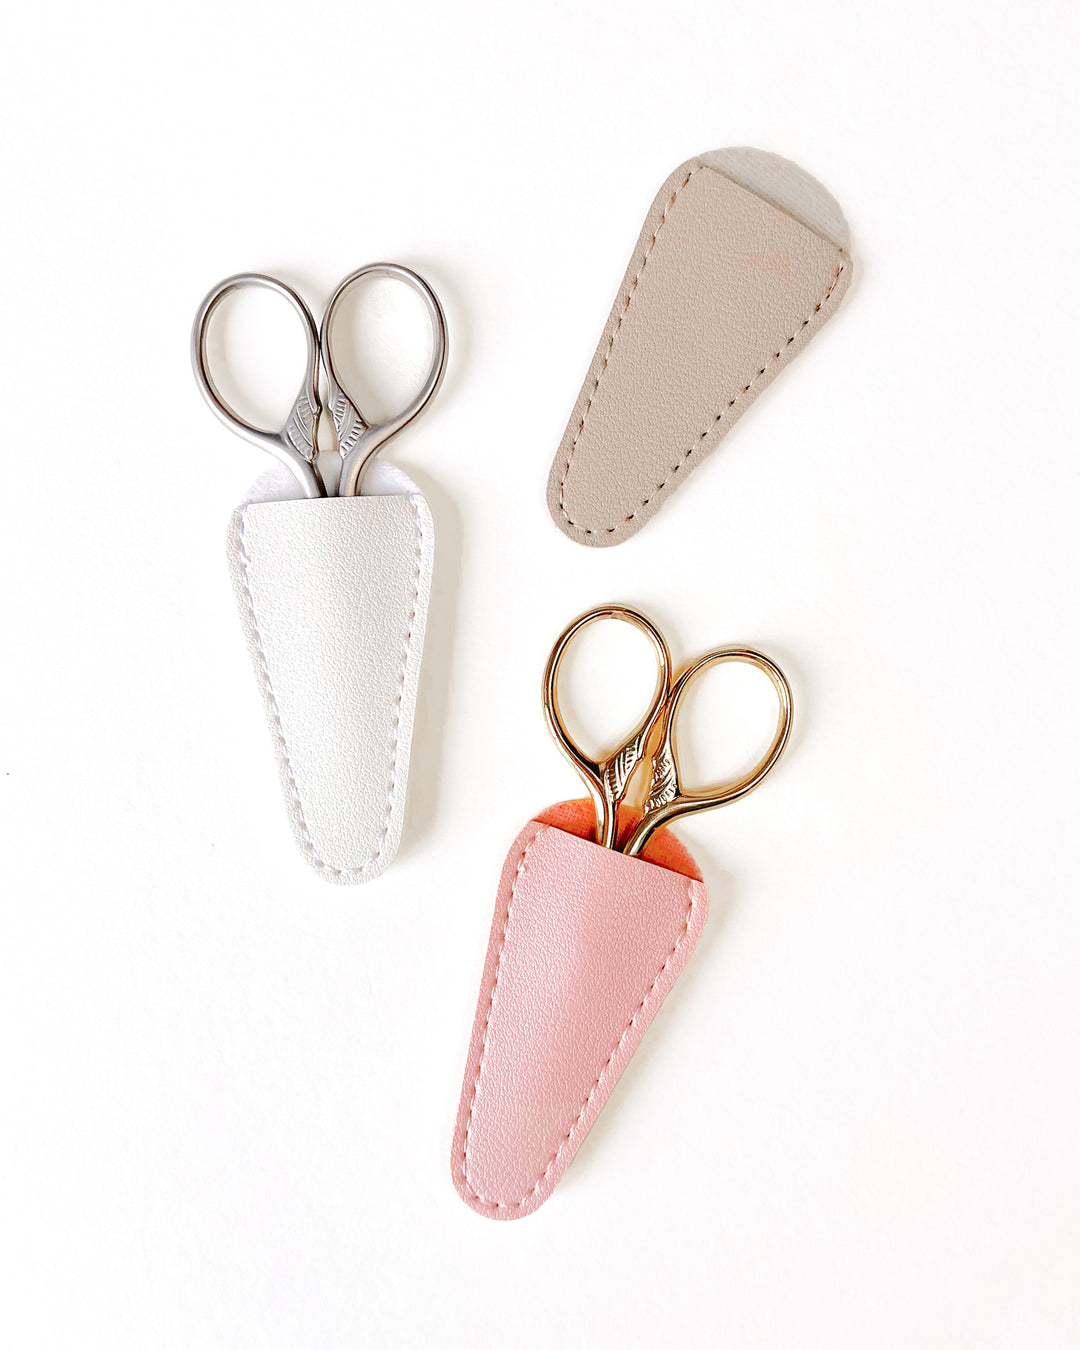 Embroidery scissors protective cases, by Unwind Studio.